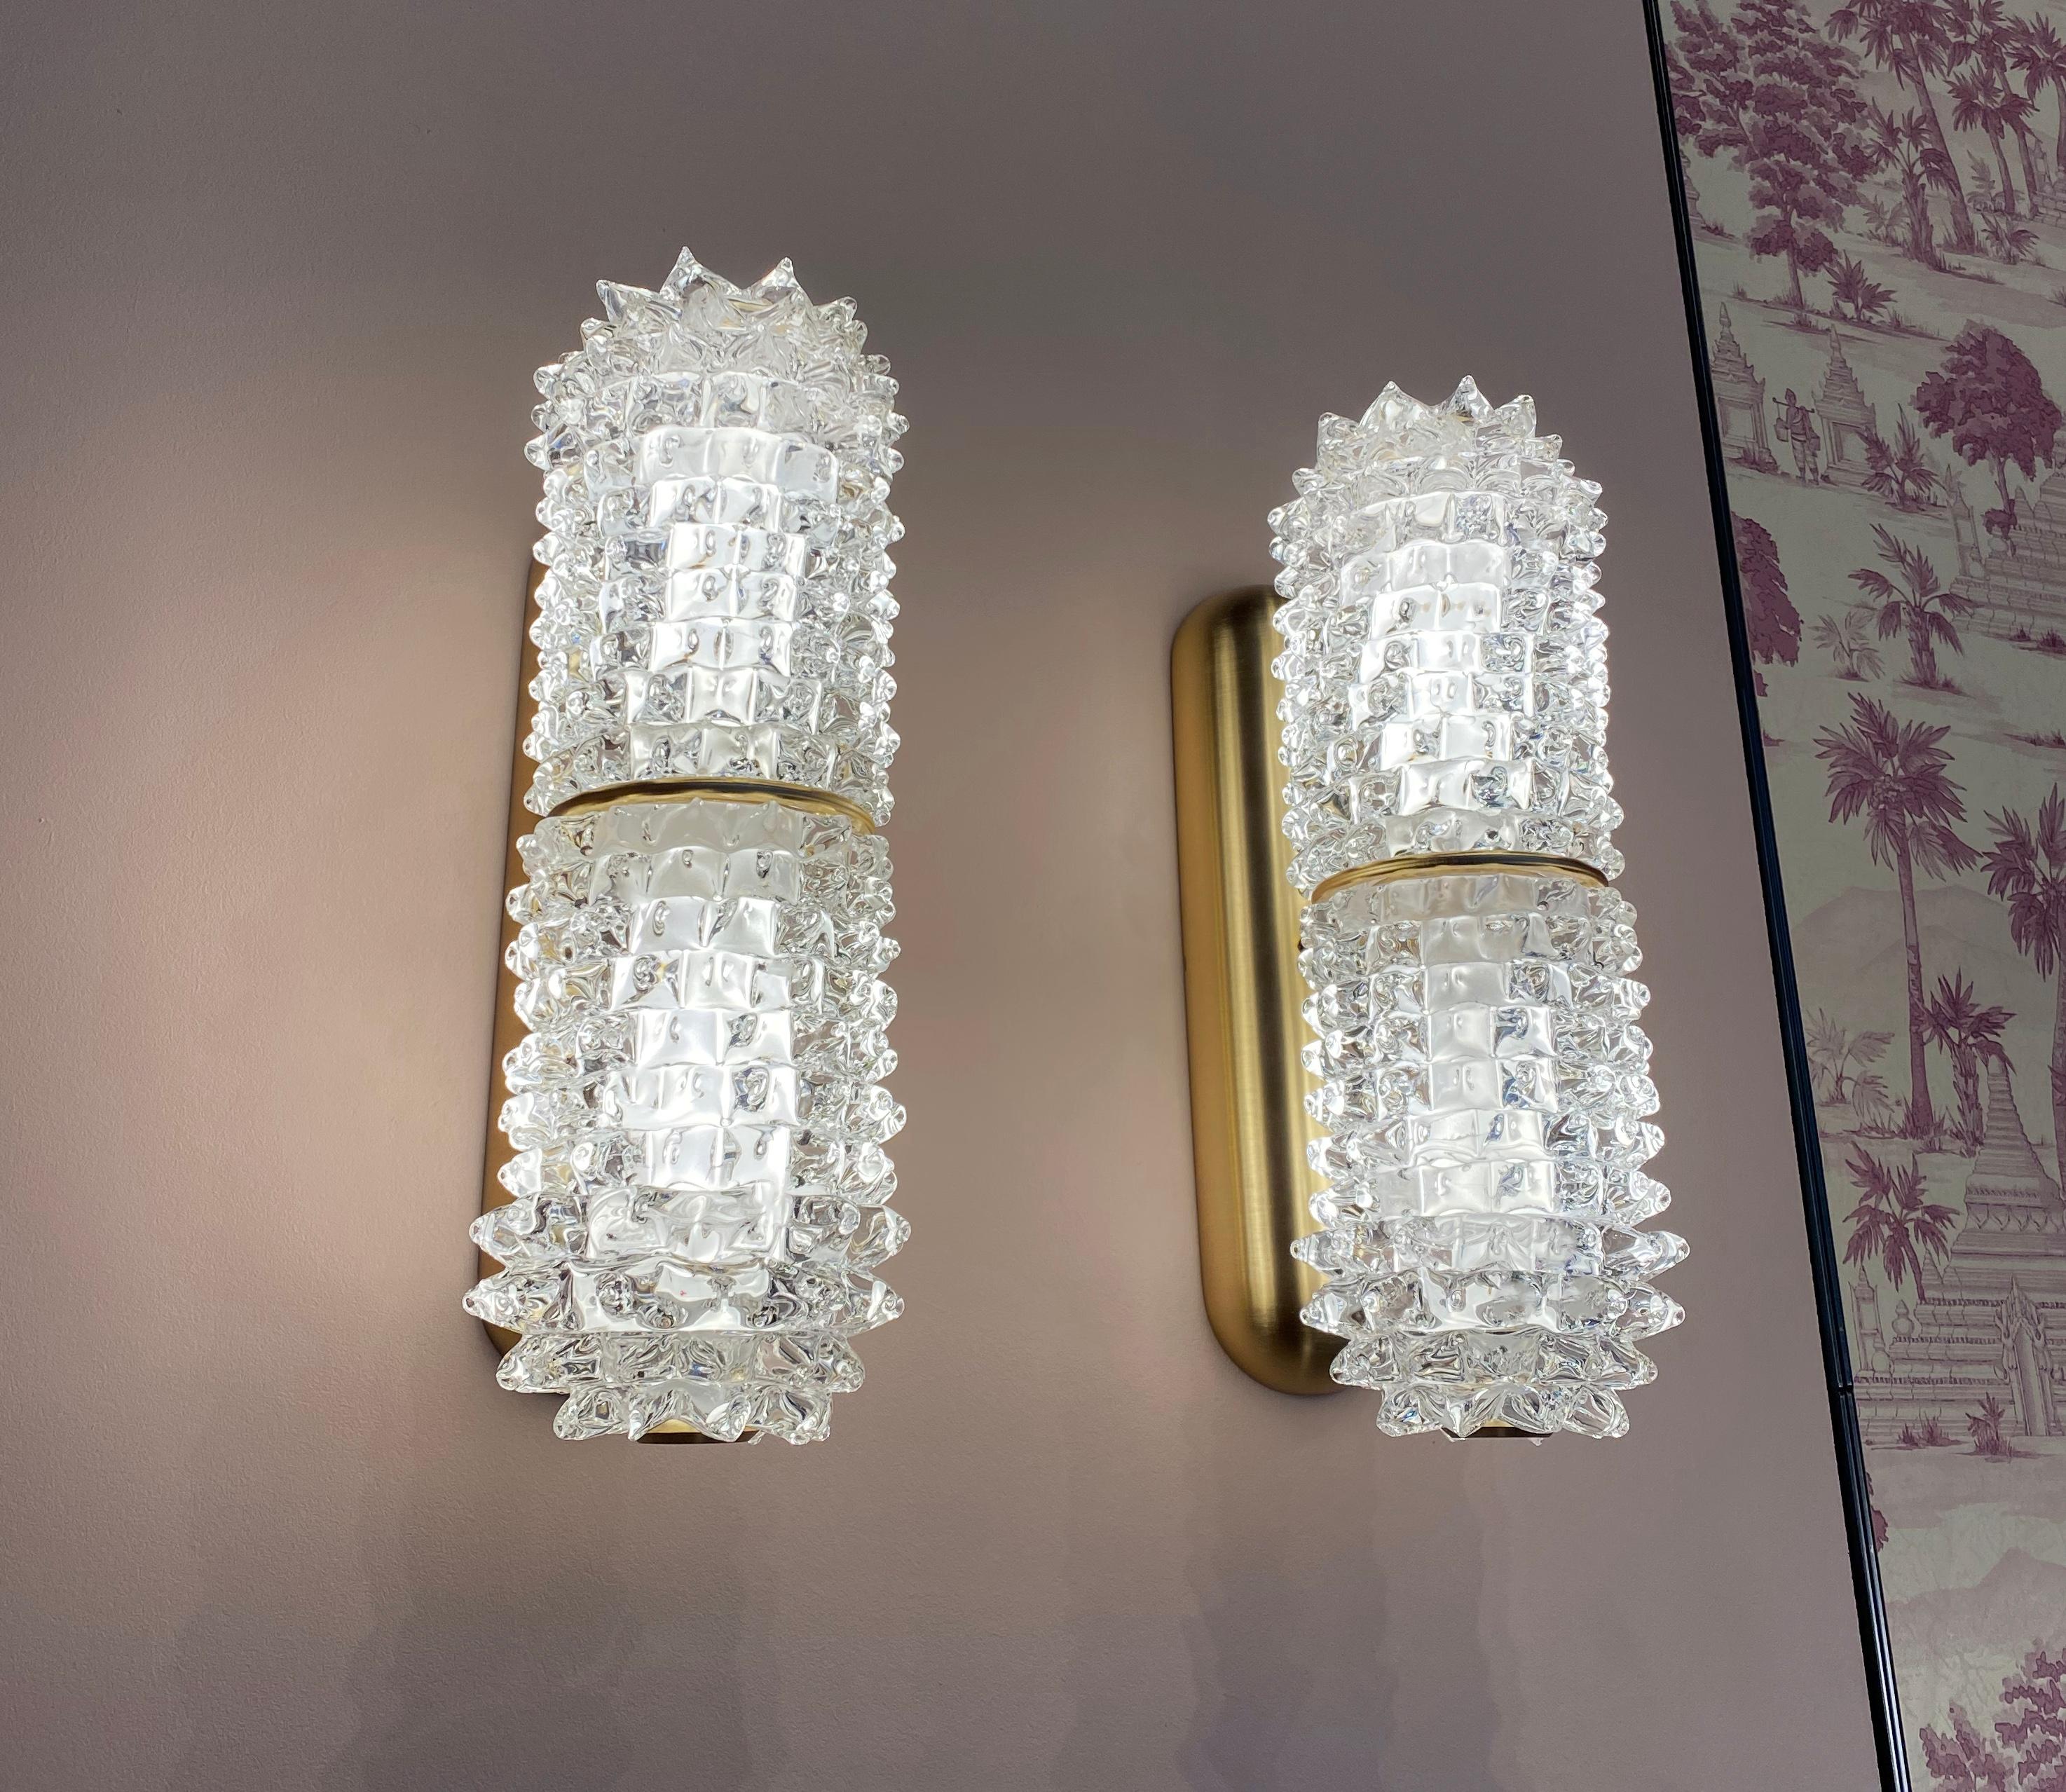 Contemporary Barovier & Toso Opera 7389 Wall Sconce in Crystal with Black Nickel Finish